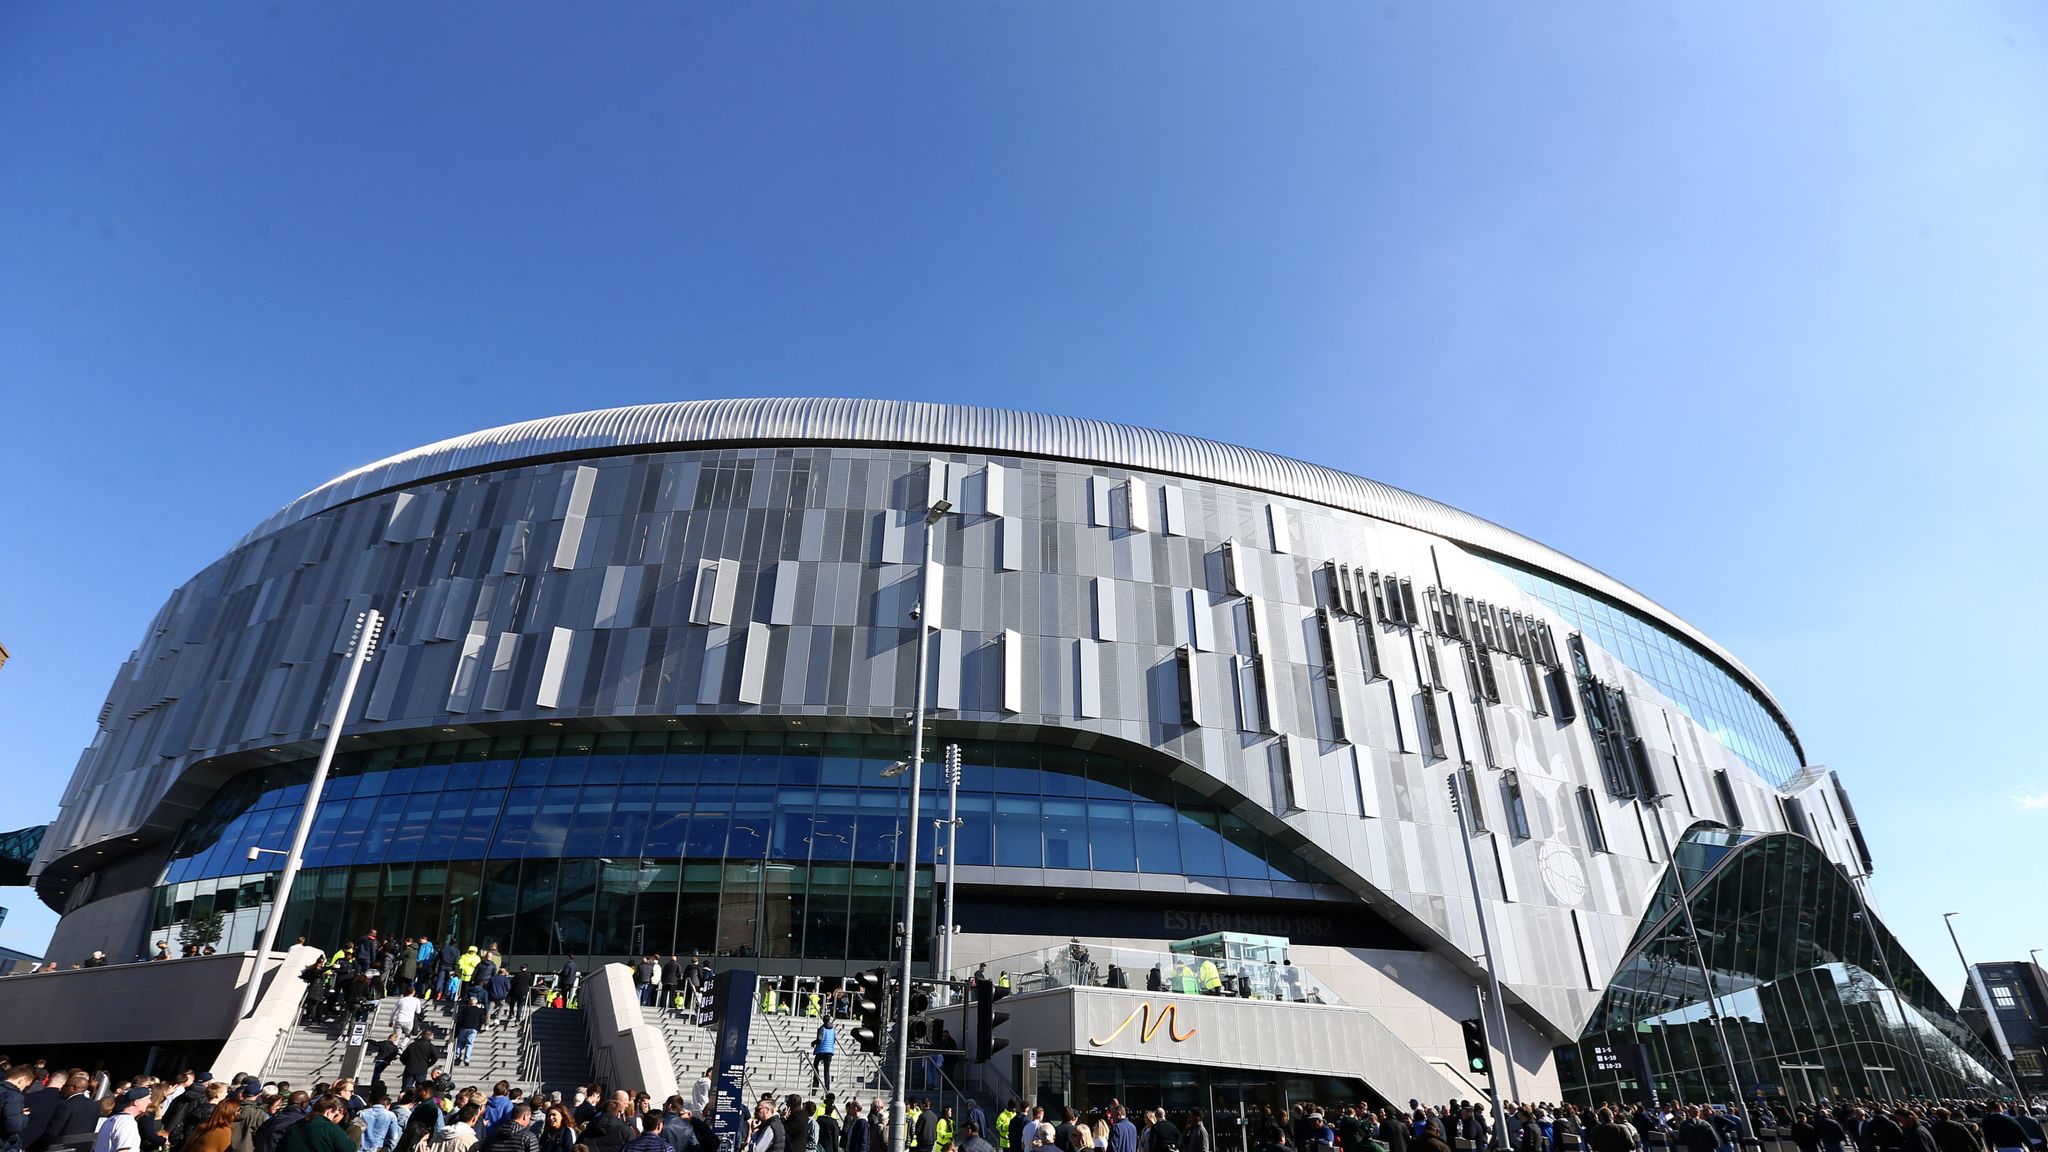 Tottenham S New Stadium All You Need To Know About Spurs New 1billion Ground Football News Sky Sports